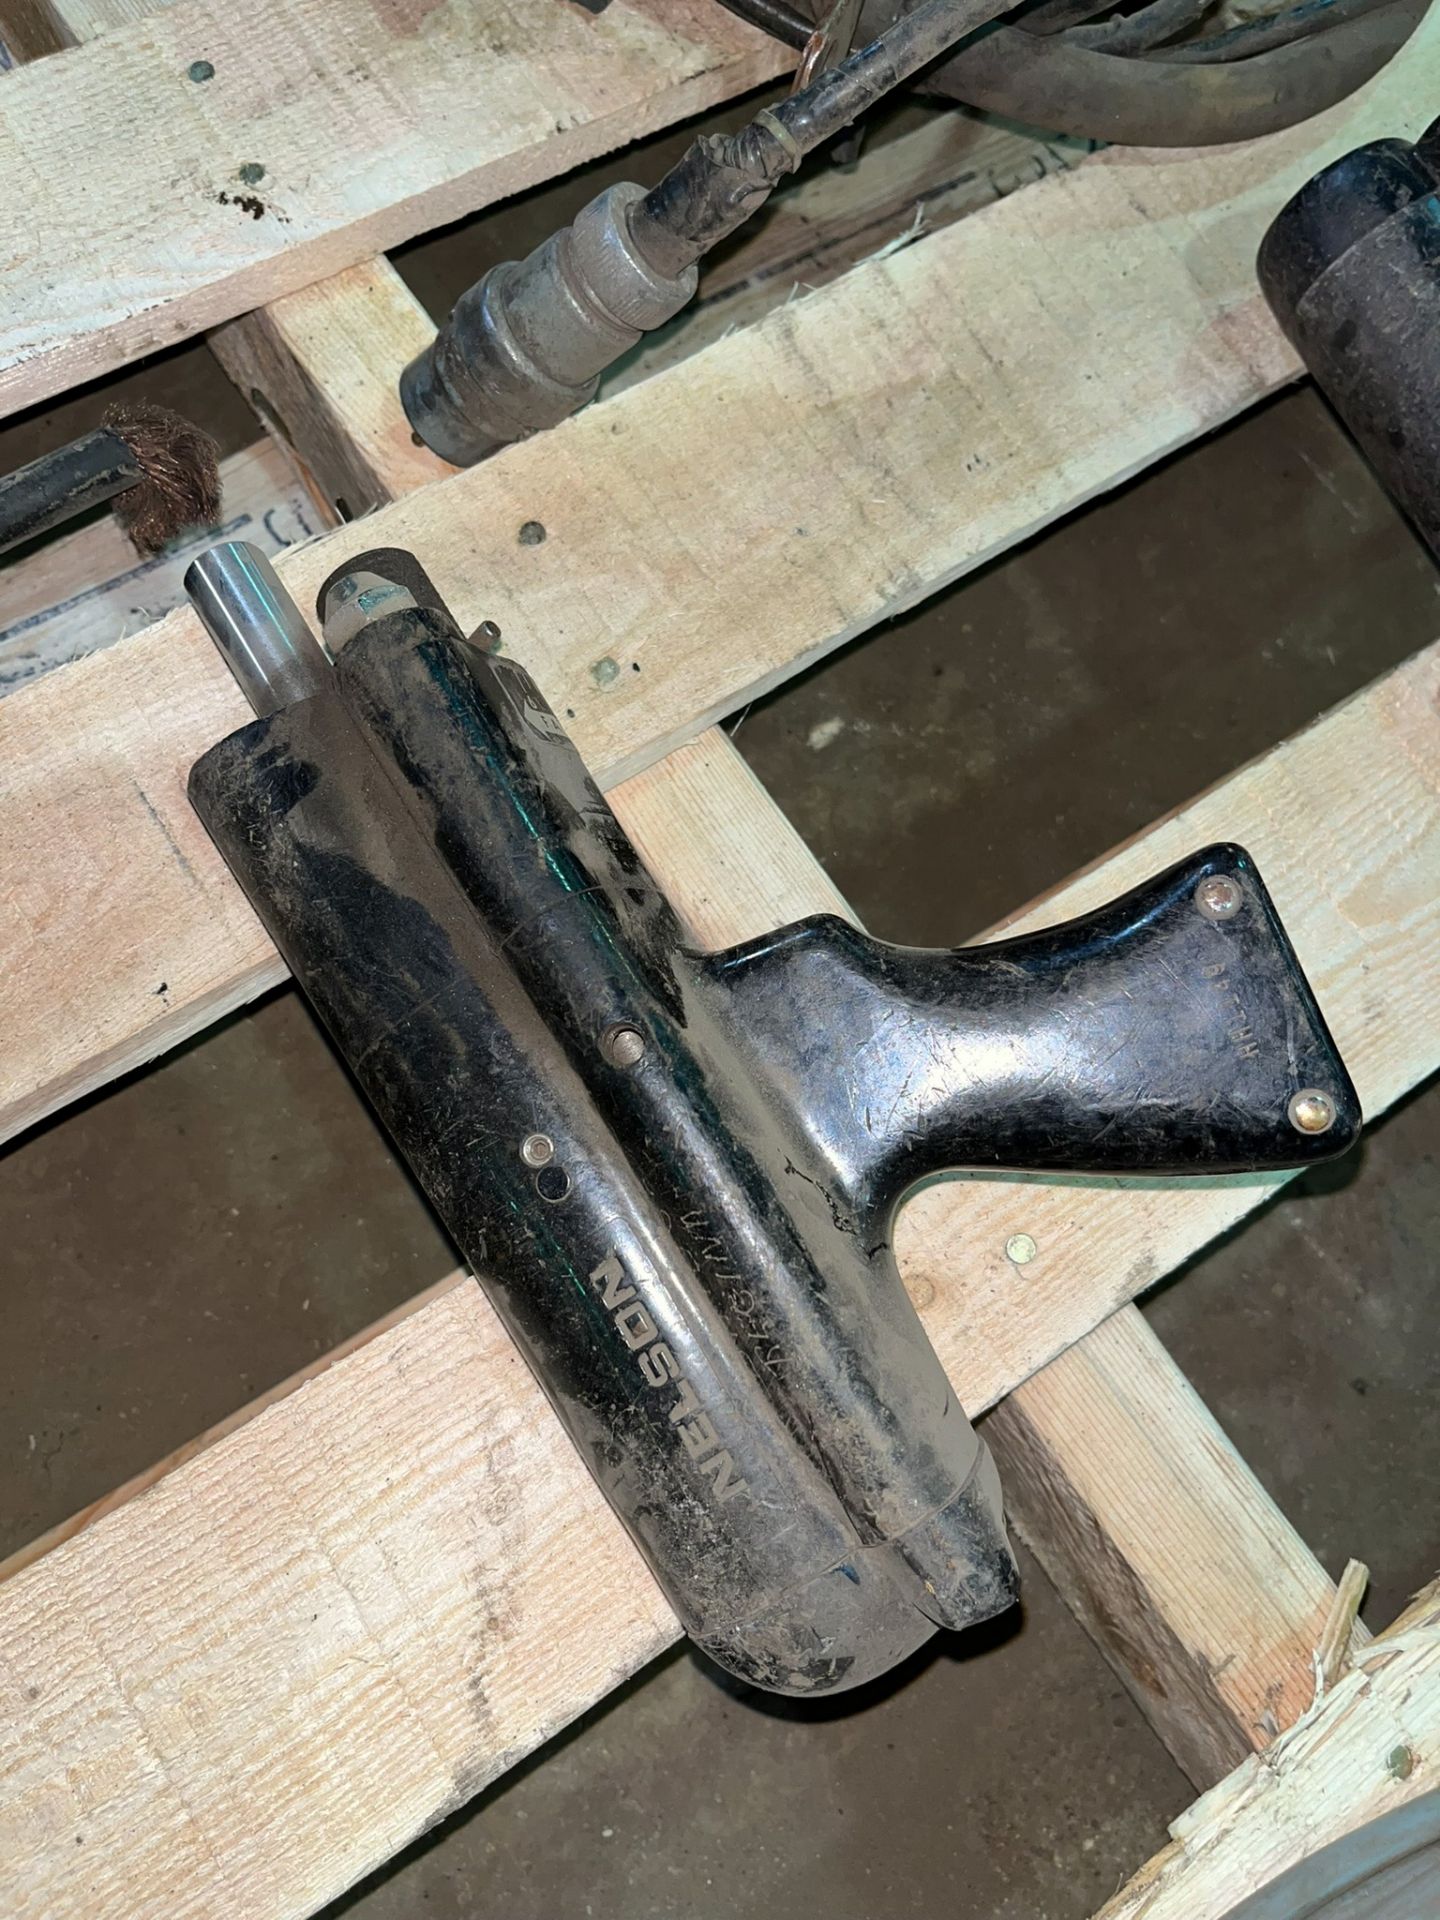 LOT/ NELSON STUD GUN PARTS [RIGGING FEES FOR LOT #111B - $40 USD PLUS APPLICABLE TAXES] - Image 6 of 8